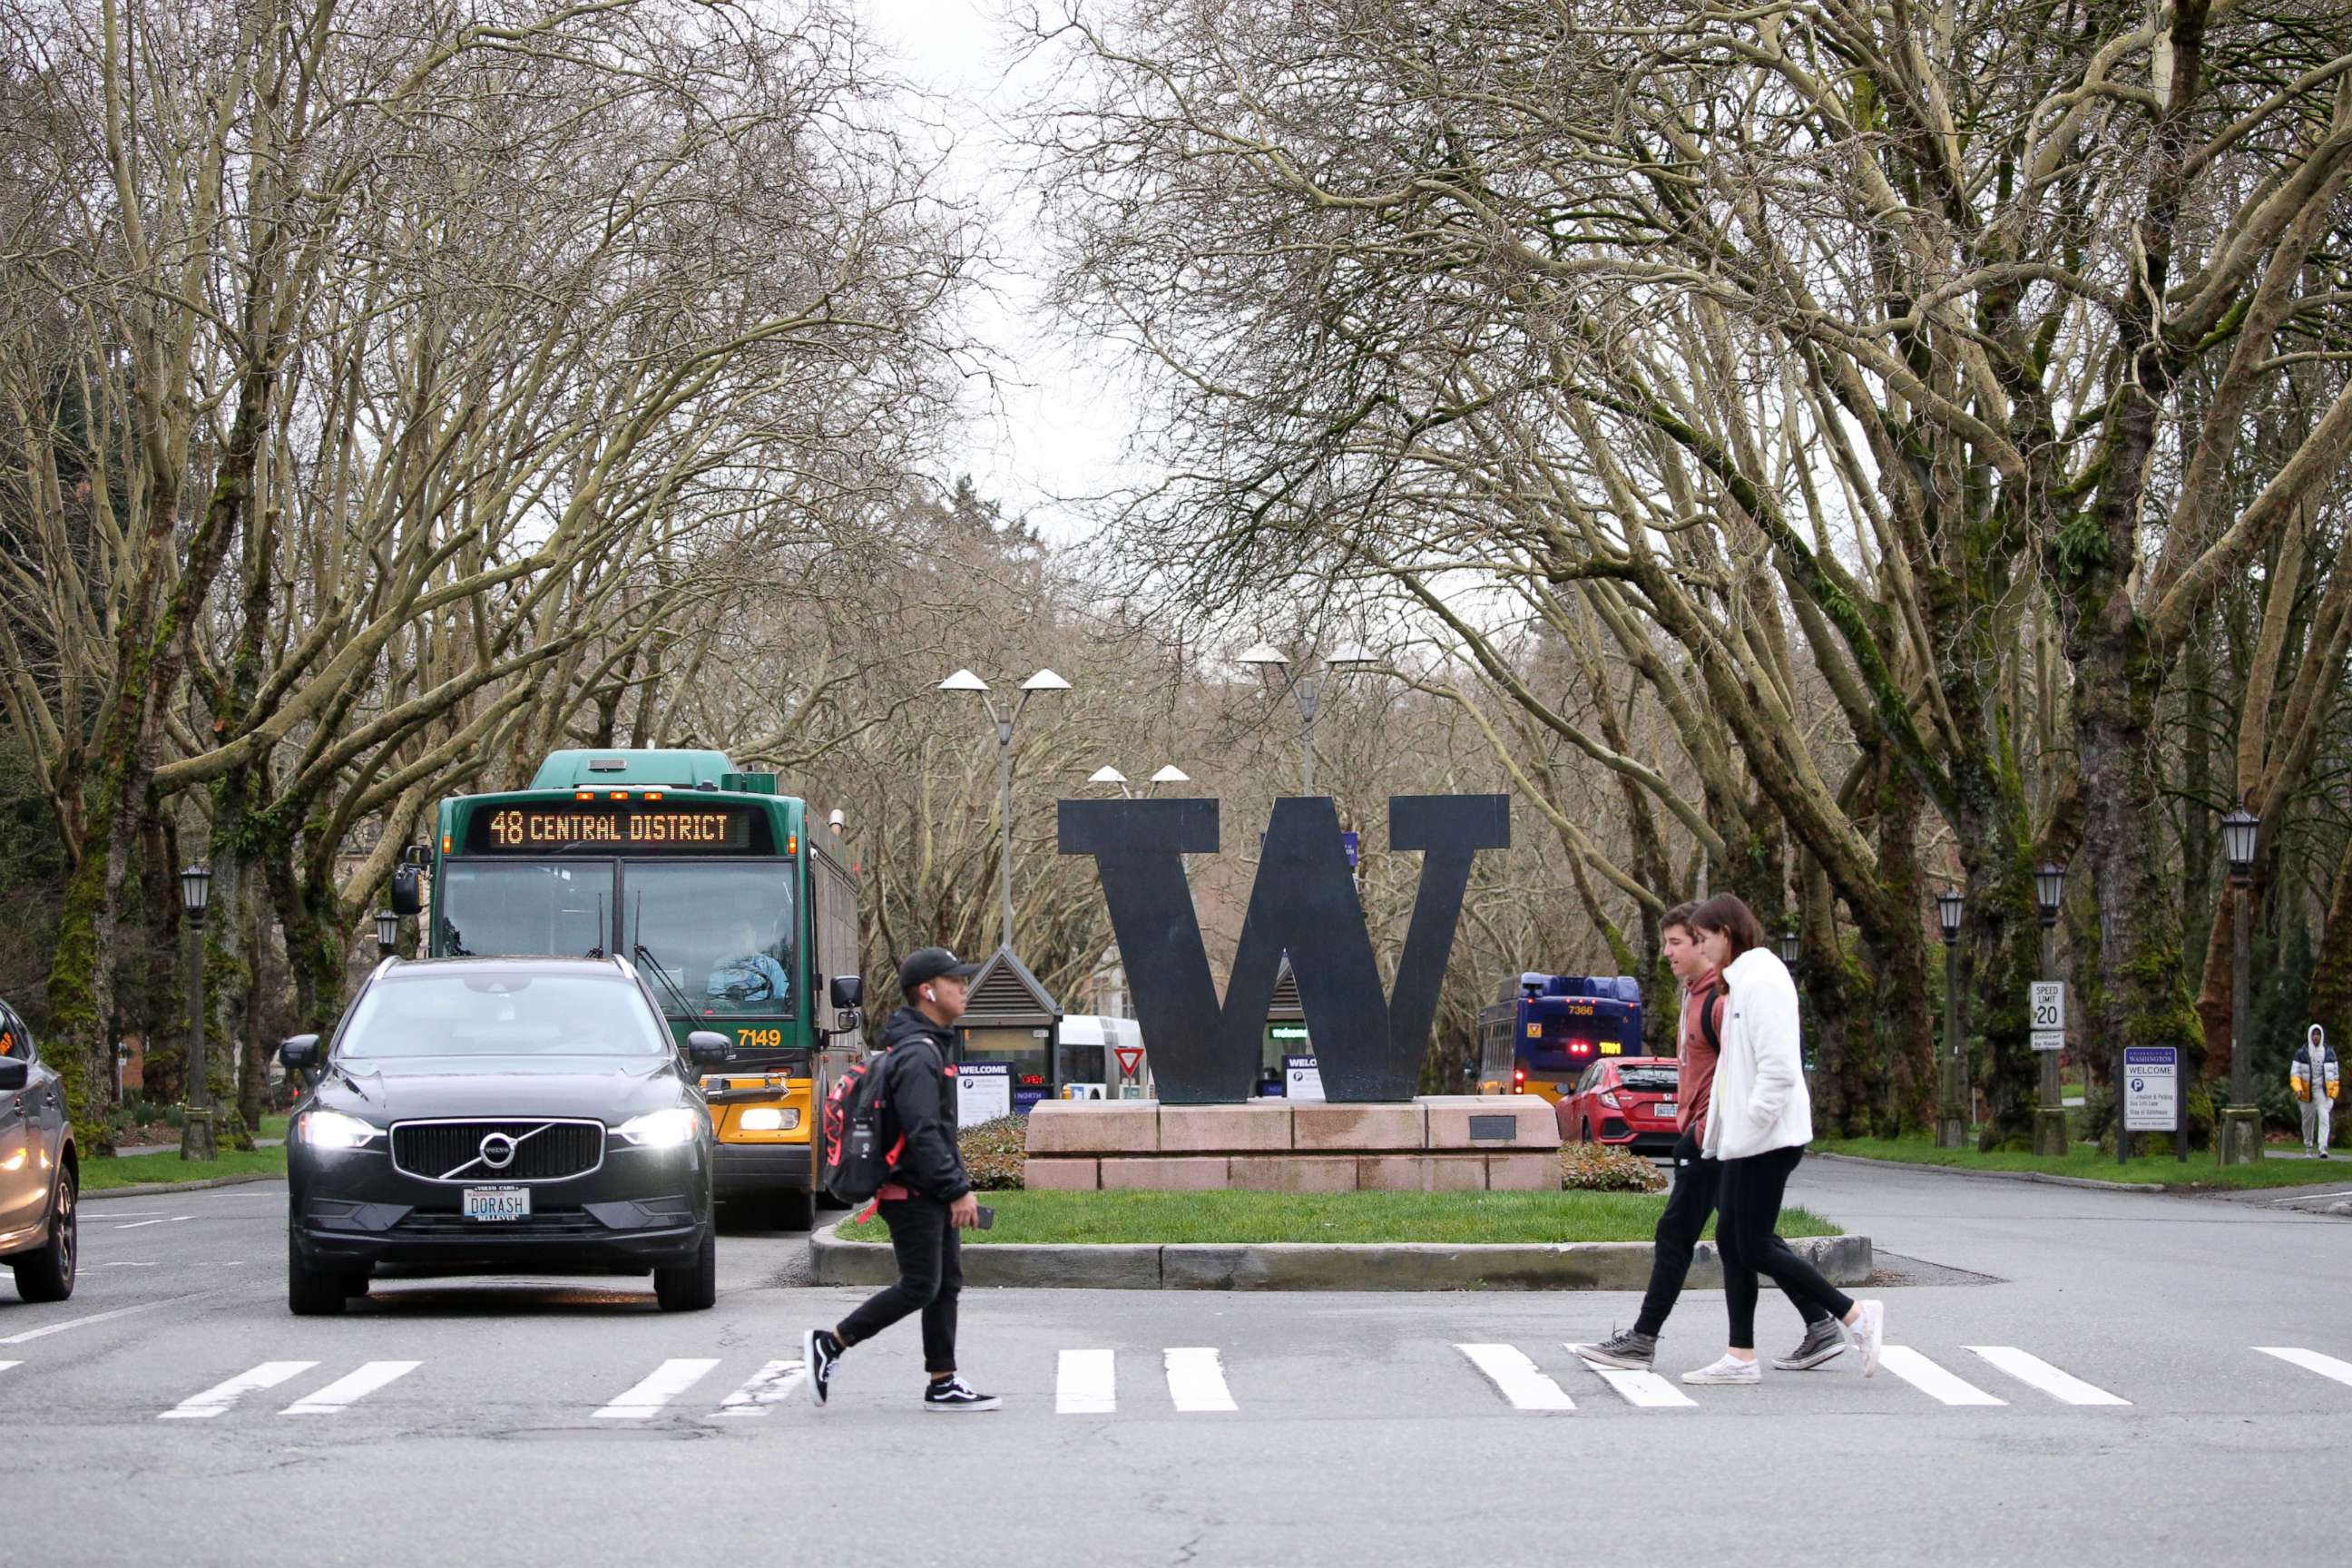 PHOTO: Students at the University of Washington are on campus for the last day of in-person classes on March 6, 2020 in Seattle. The university closed March 9, as a reaction to the novel coronavirus outbreak for the remainder of the winter quarter.